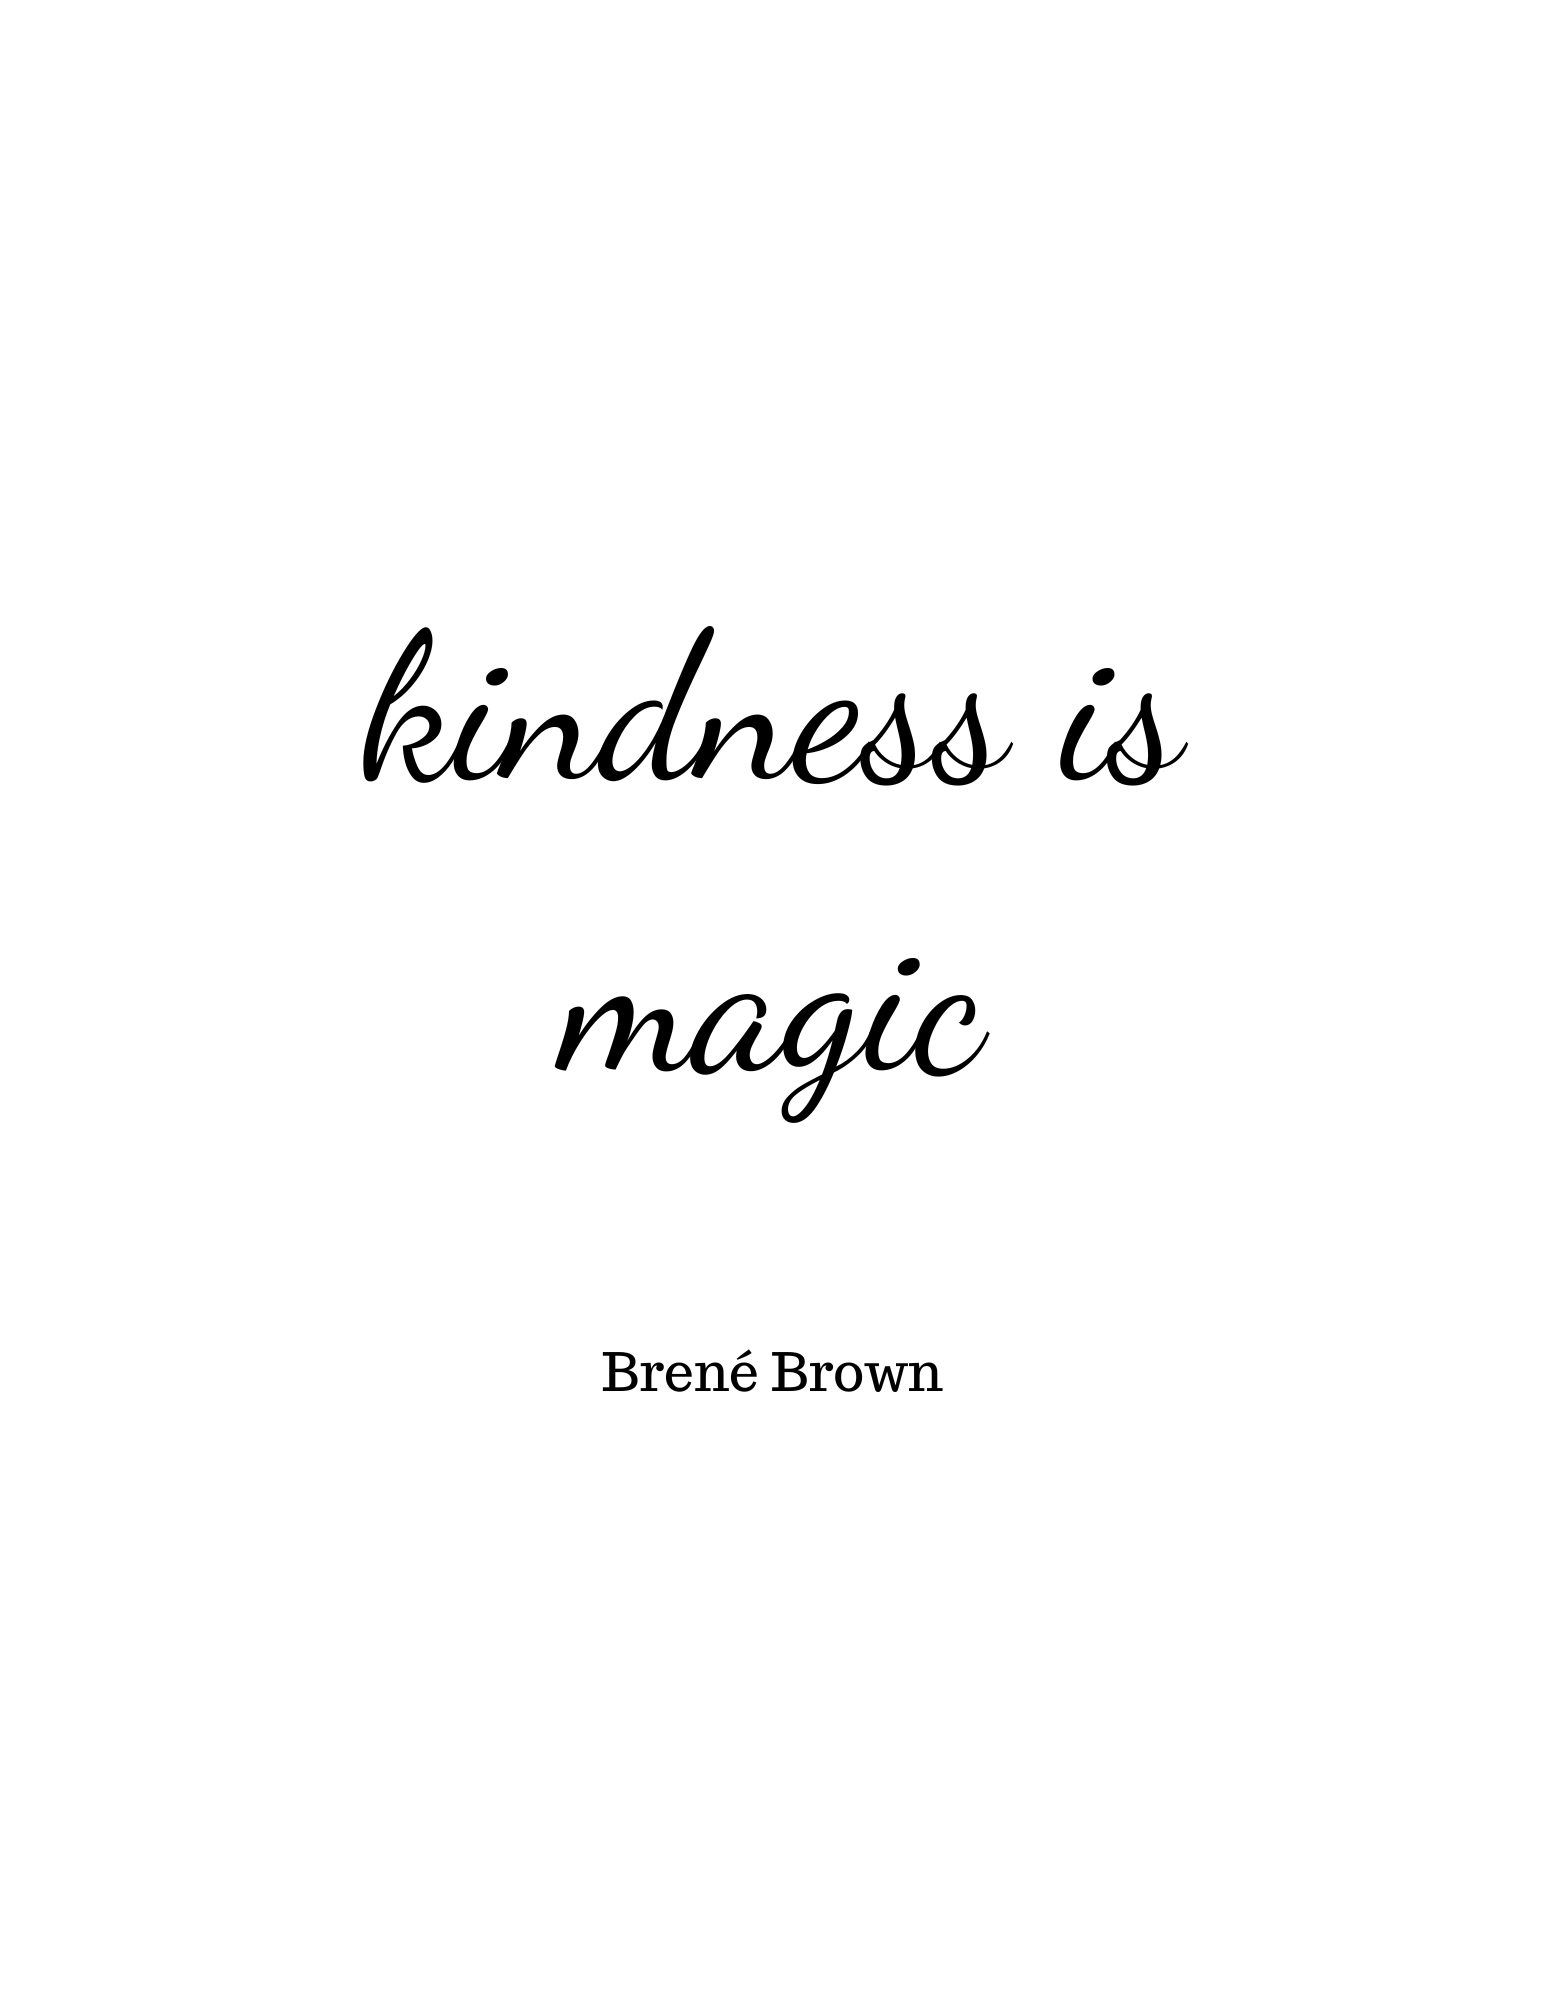 Kindness is magic - Brene Brown